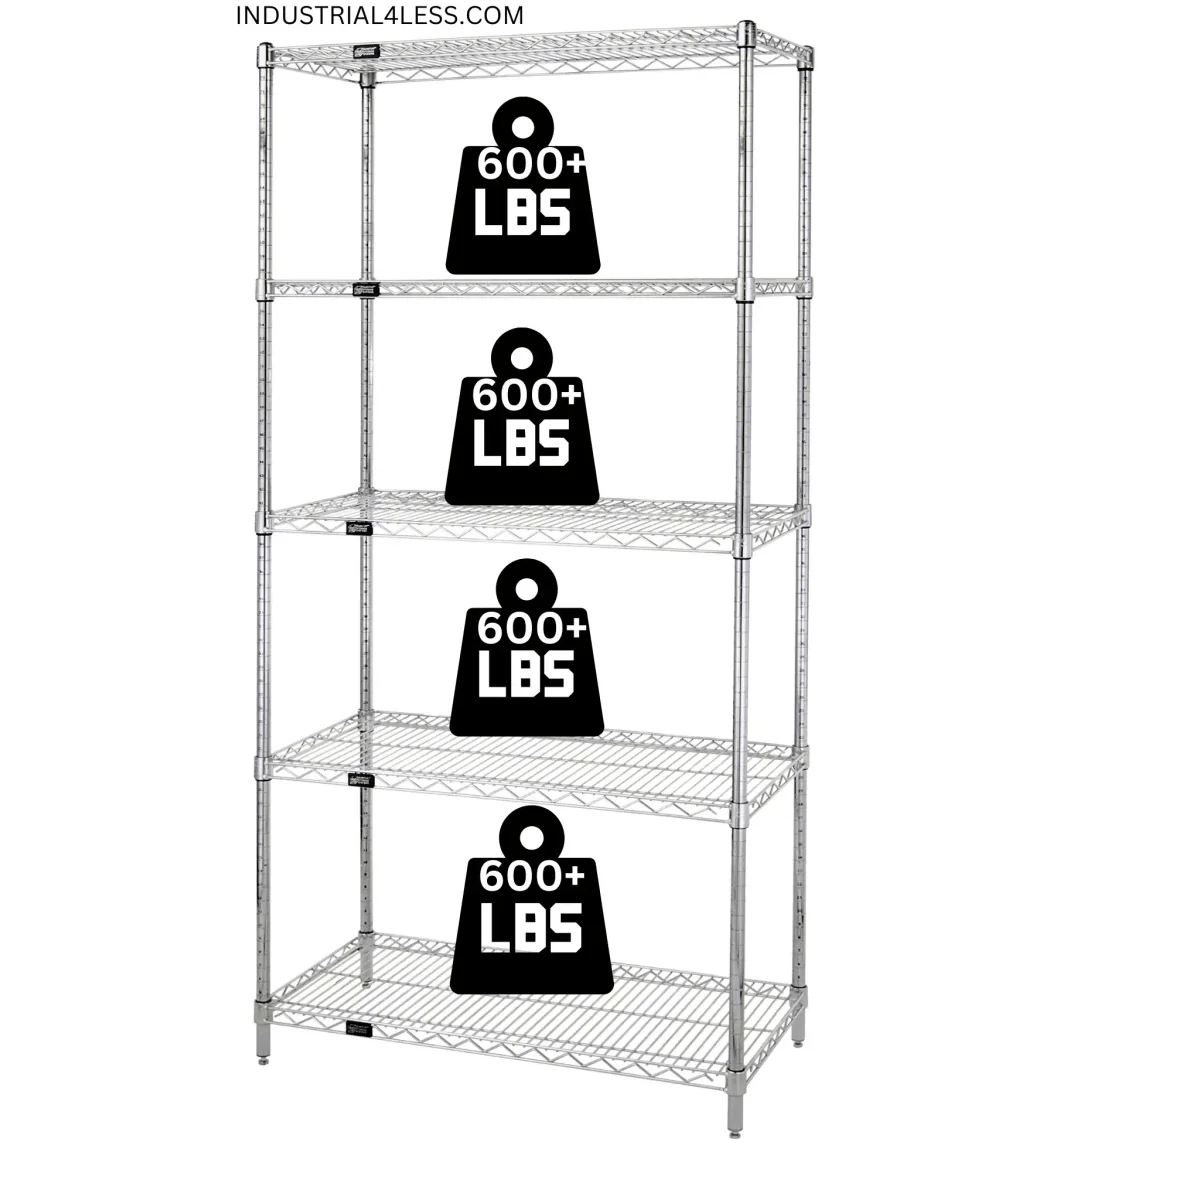 36" x 60" Stainless Steel Wire Shelving Unit - Industrial 4 Less - 36605S-5